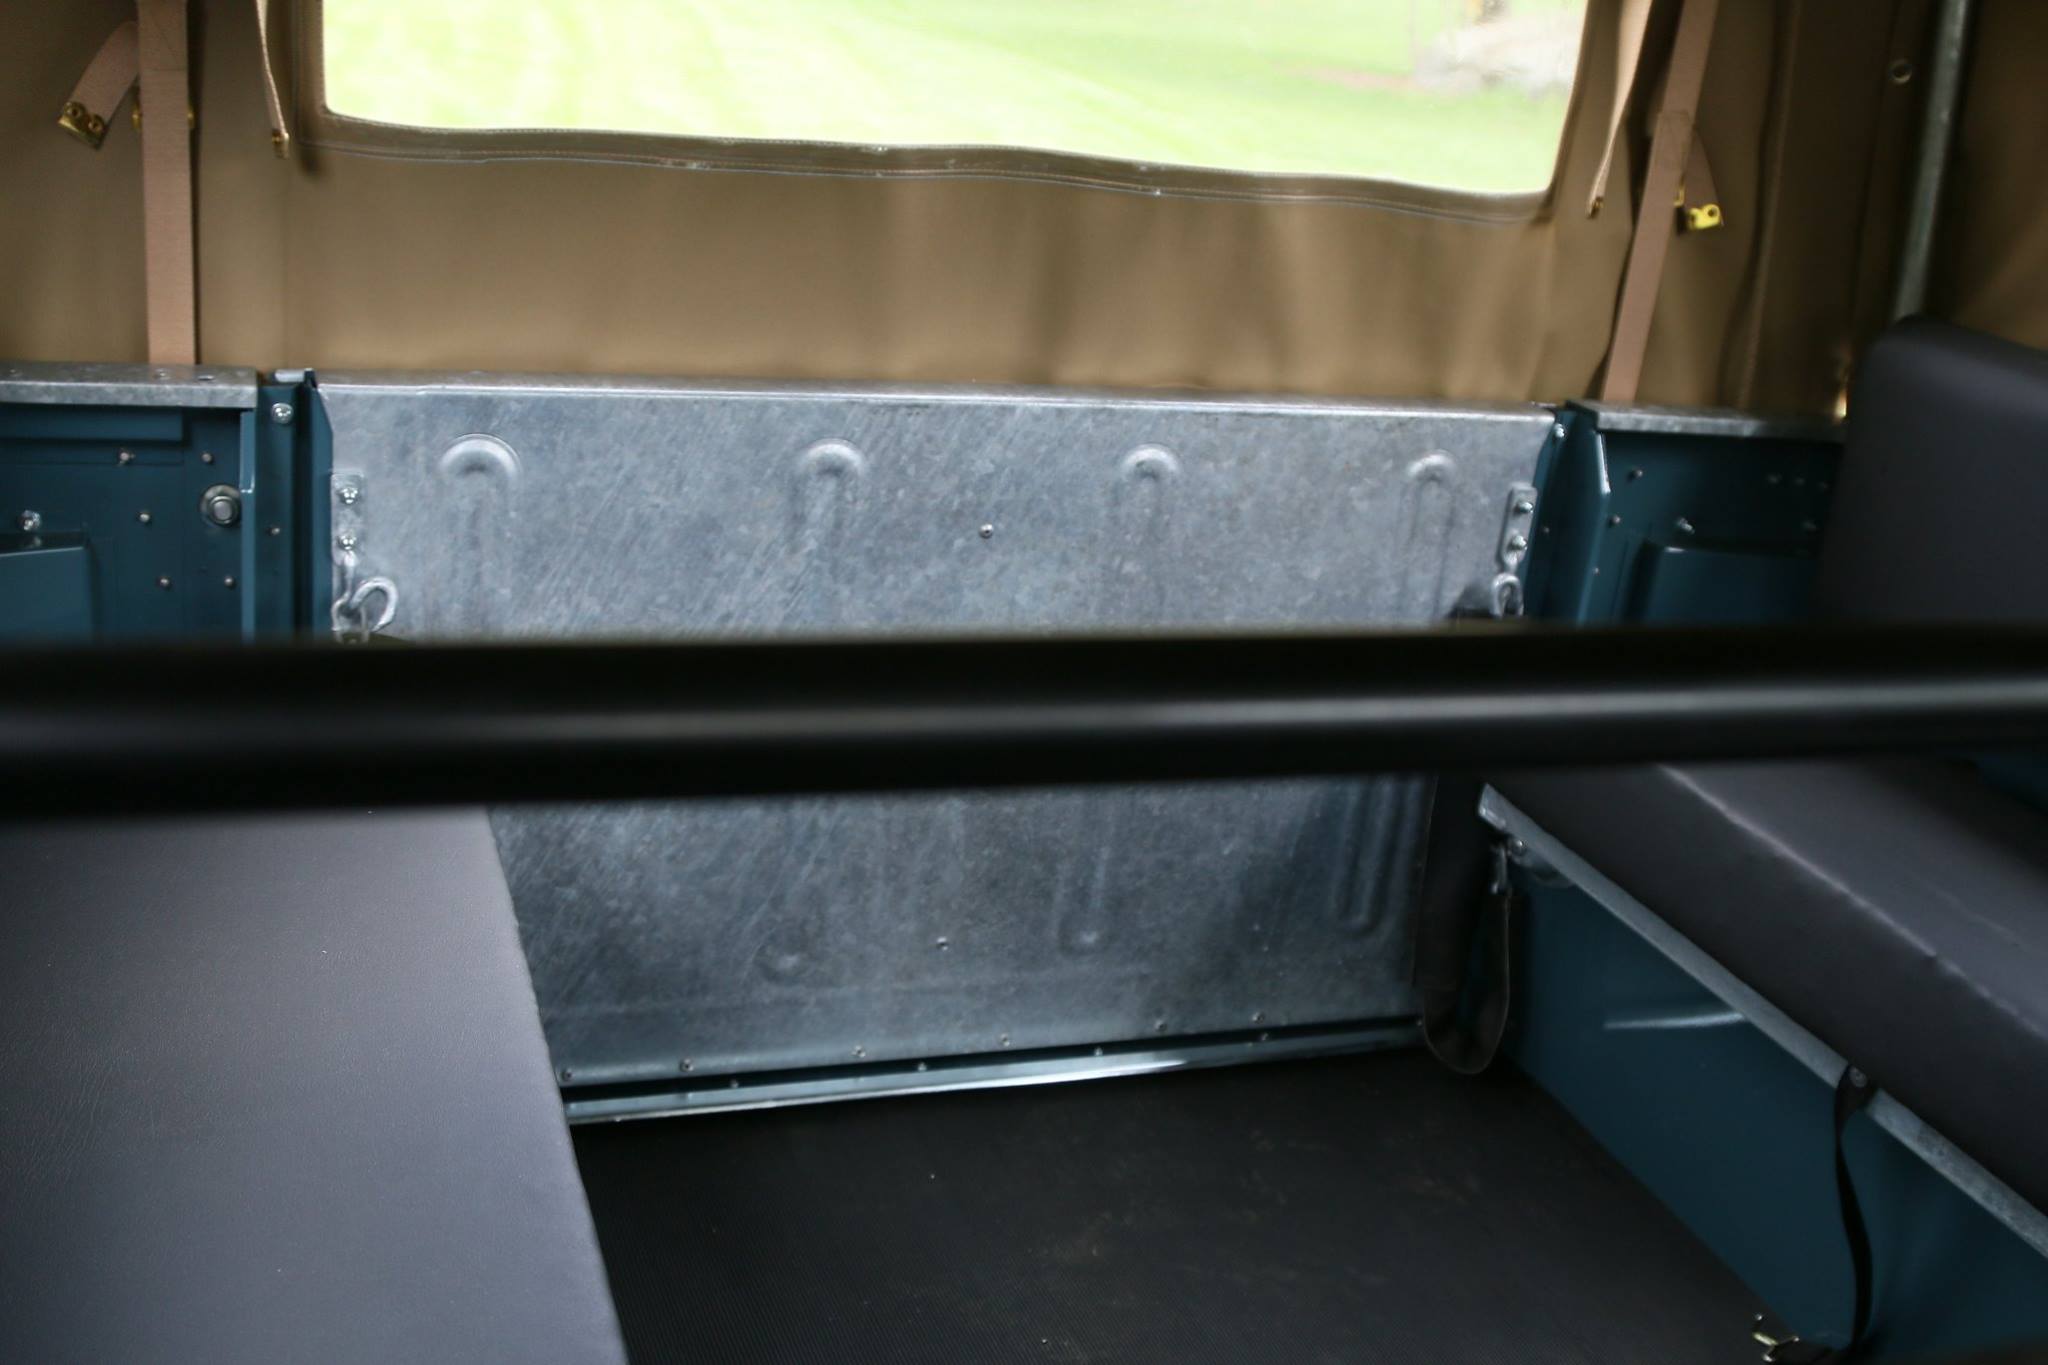 A shot of the rear load bay showing the galvanzied tailgate panel and jump seats.